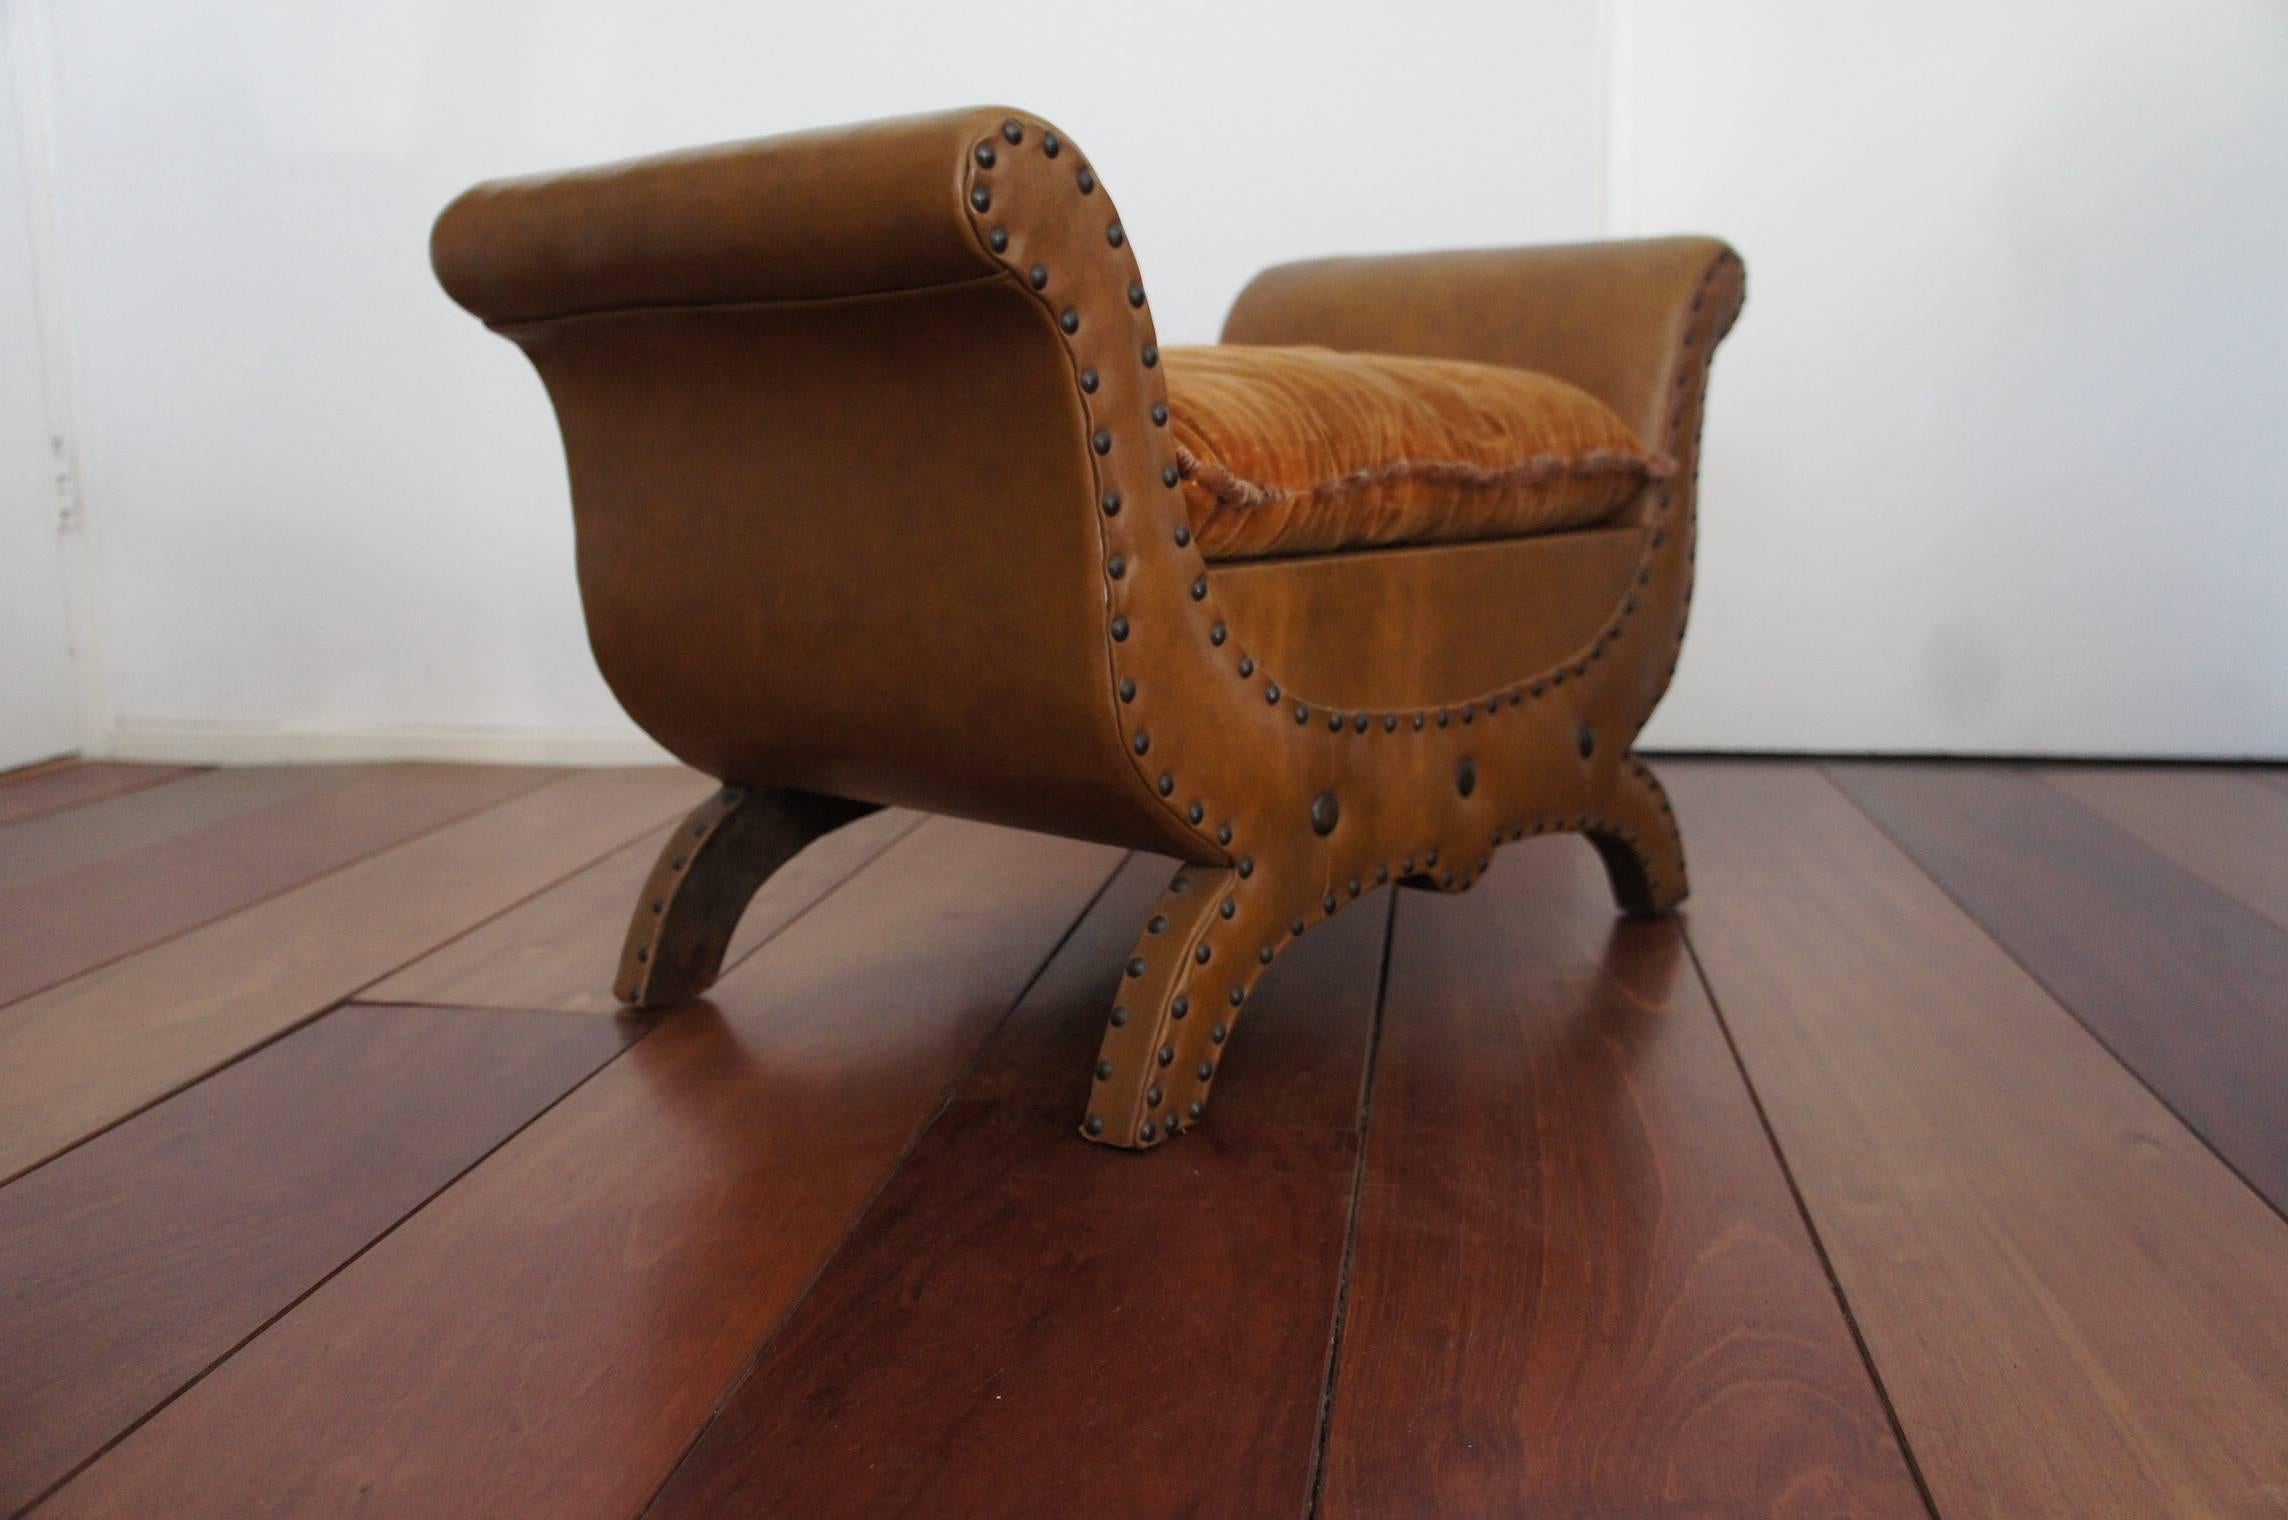 Hand-Crafted Mid 1900s Renaissance Revival Leather & Wood Fireplace Bench or Stool w. Pillow